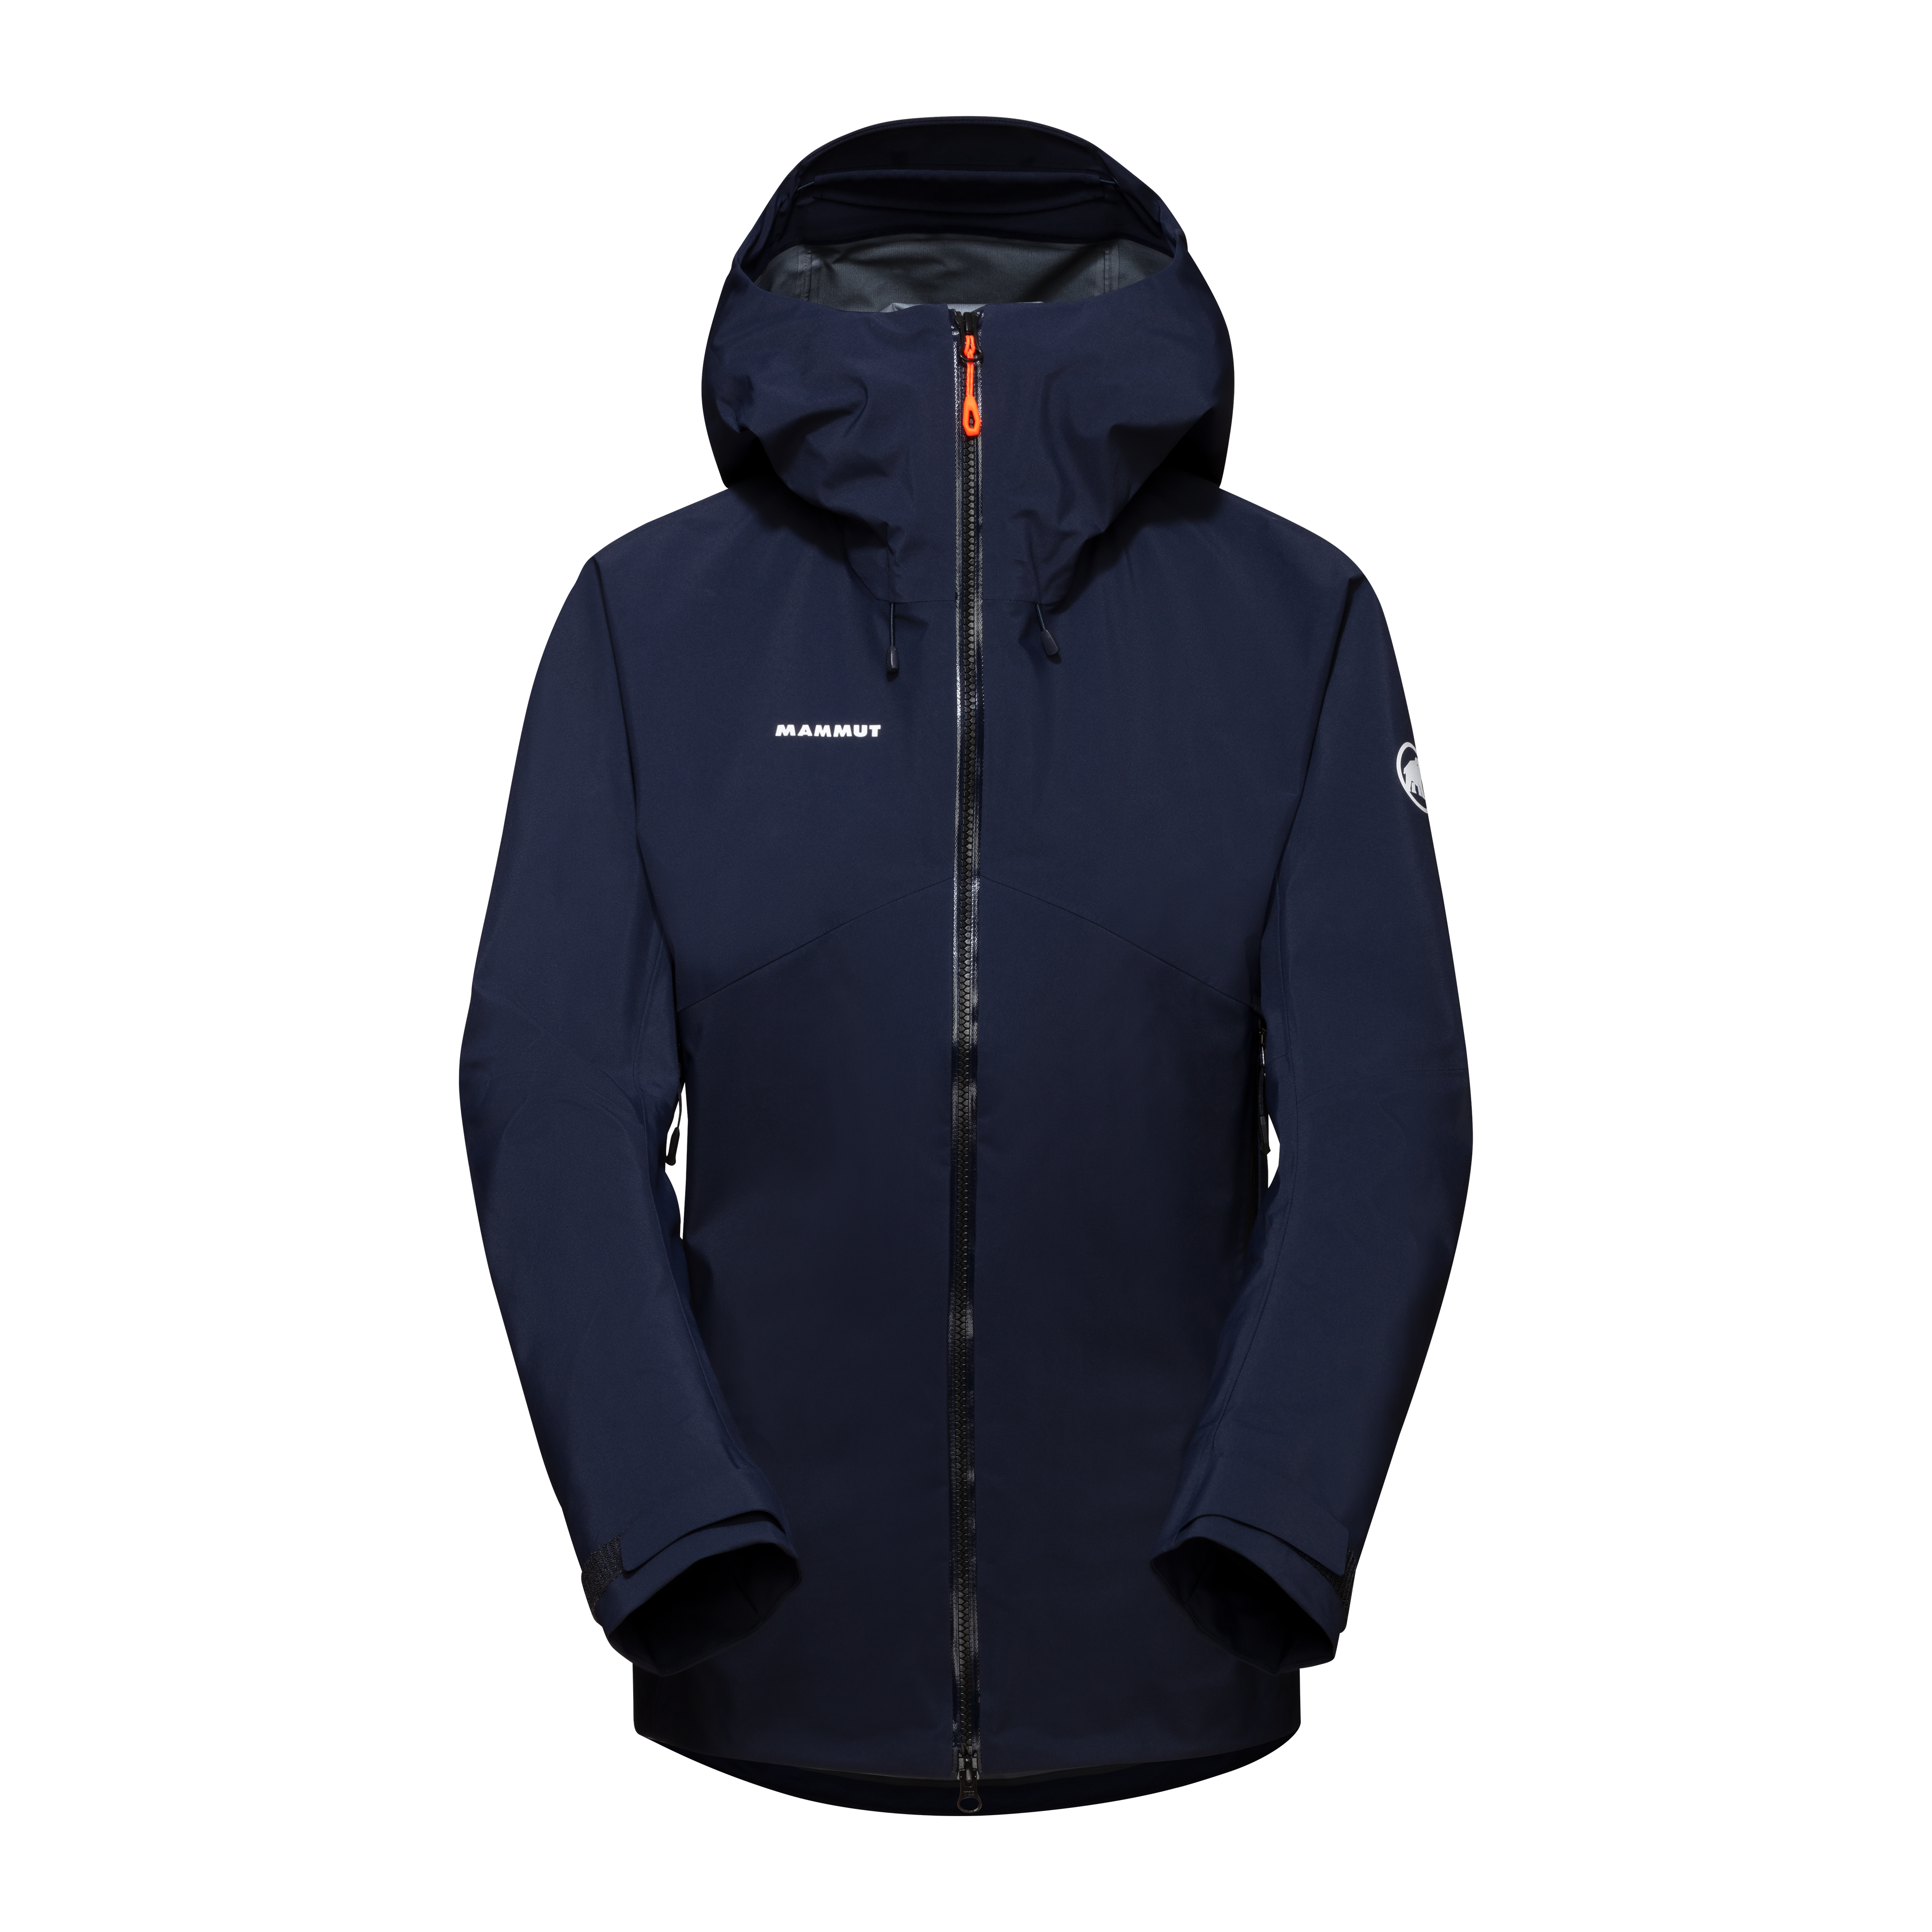 Crater Pro HS Hooded Jacket Women